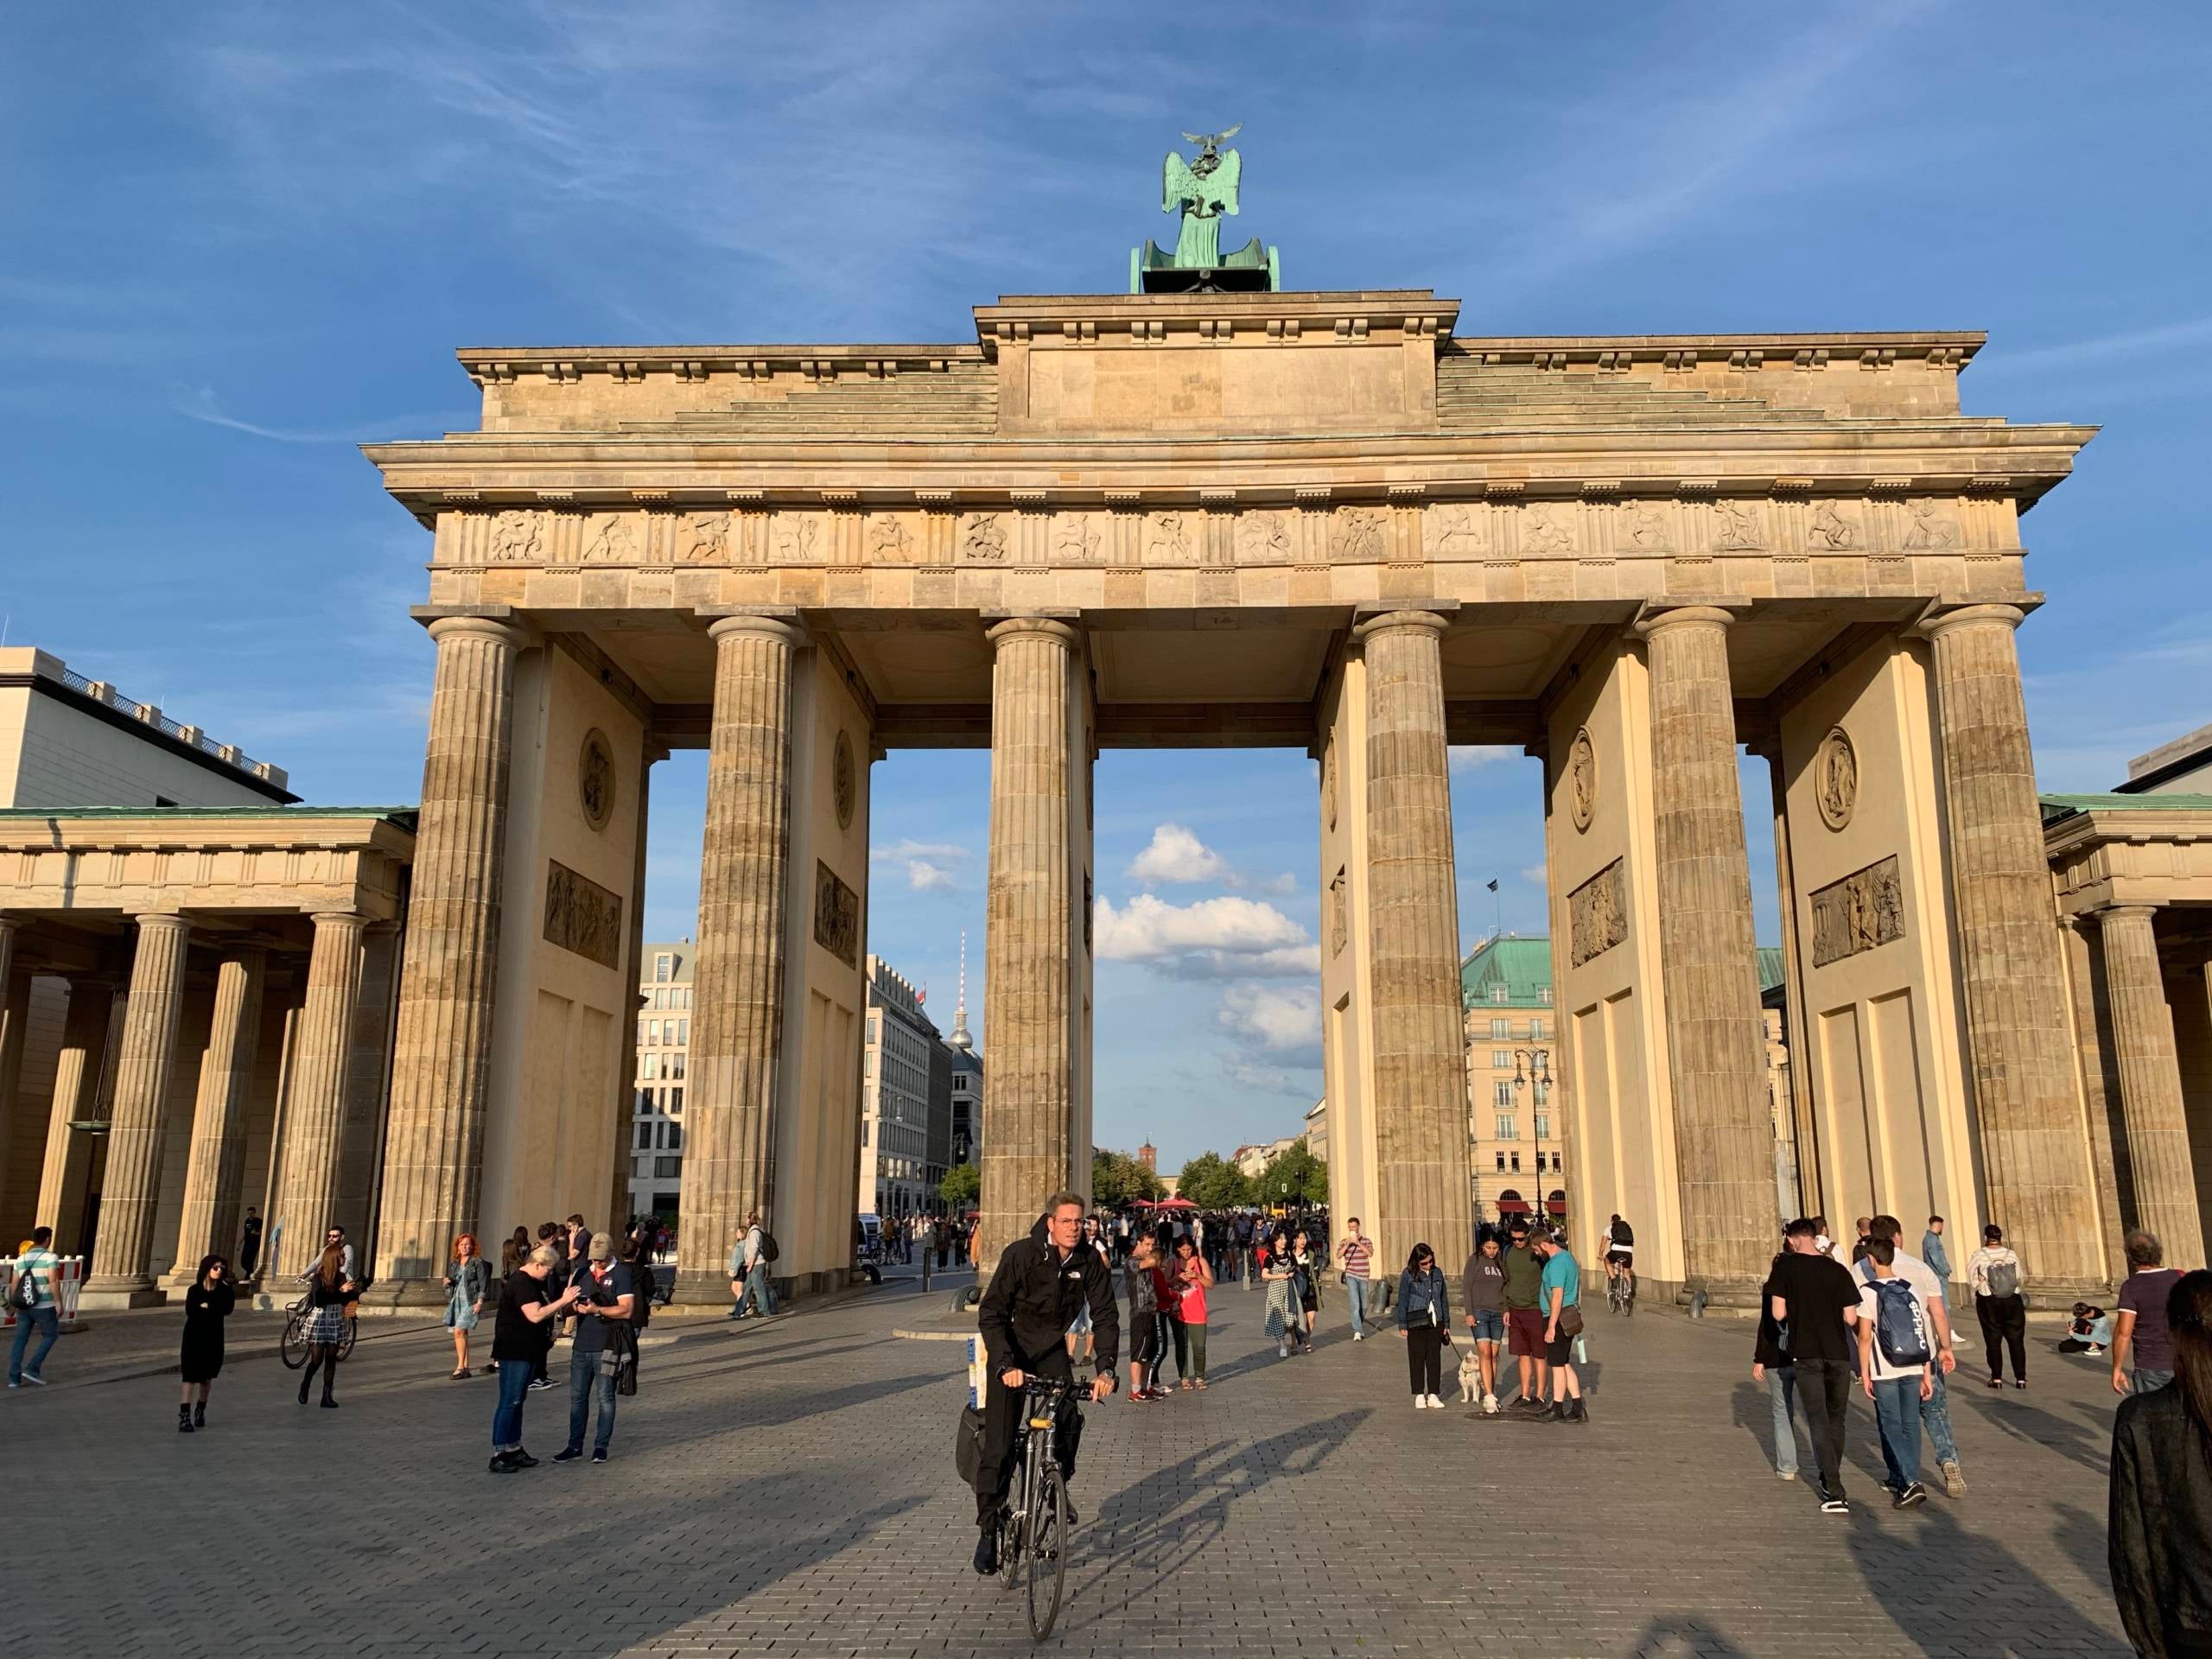 Berlin August 2019. (Photo by Clint Henderson/The Points Guy)